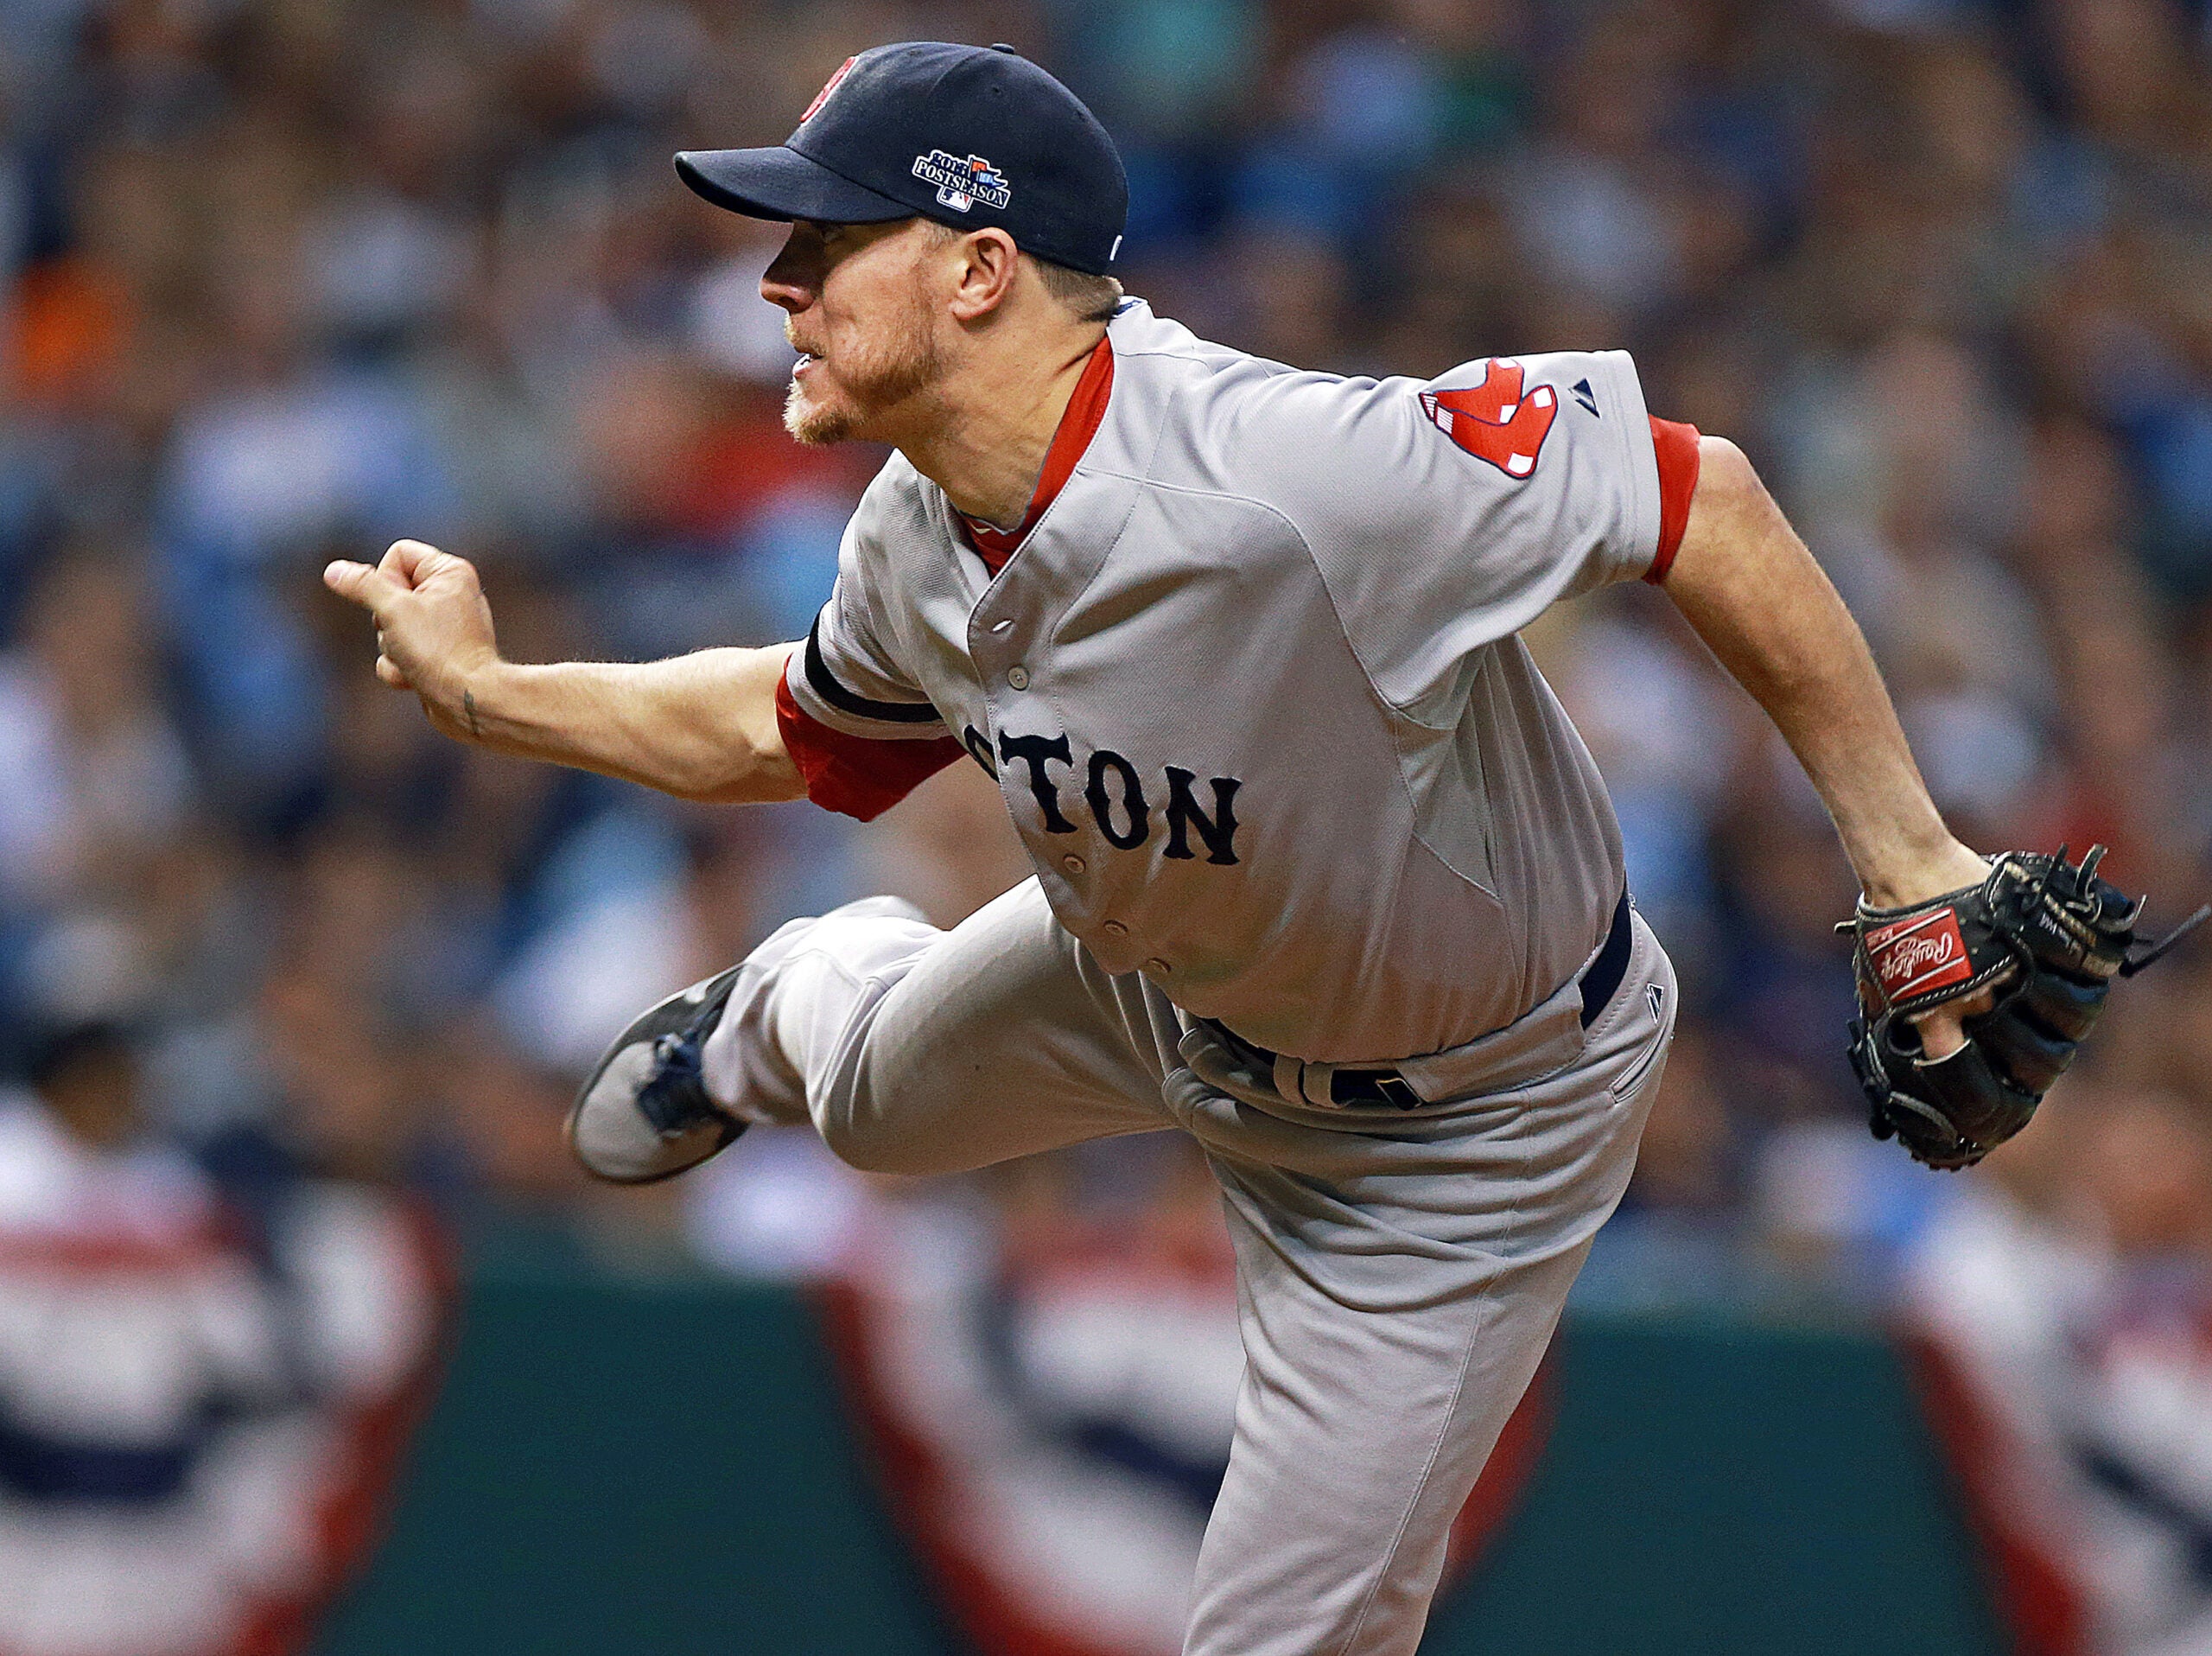 It's a great start for Red Sox and Jake Peavy